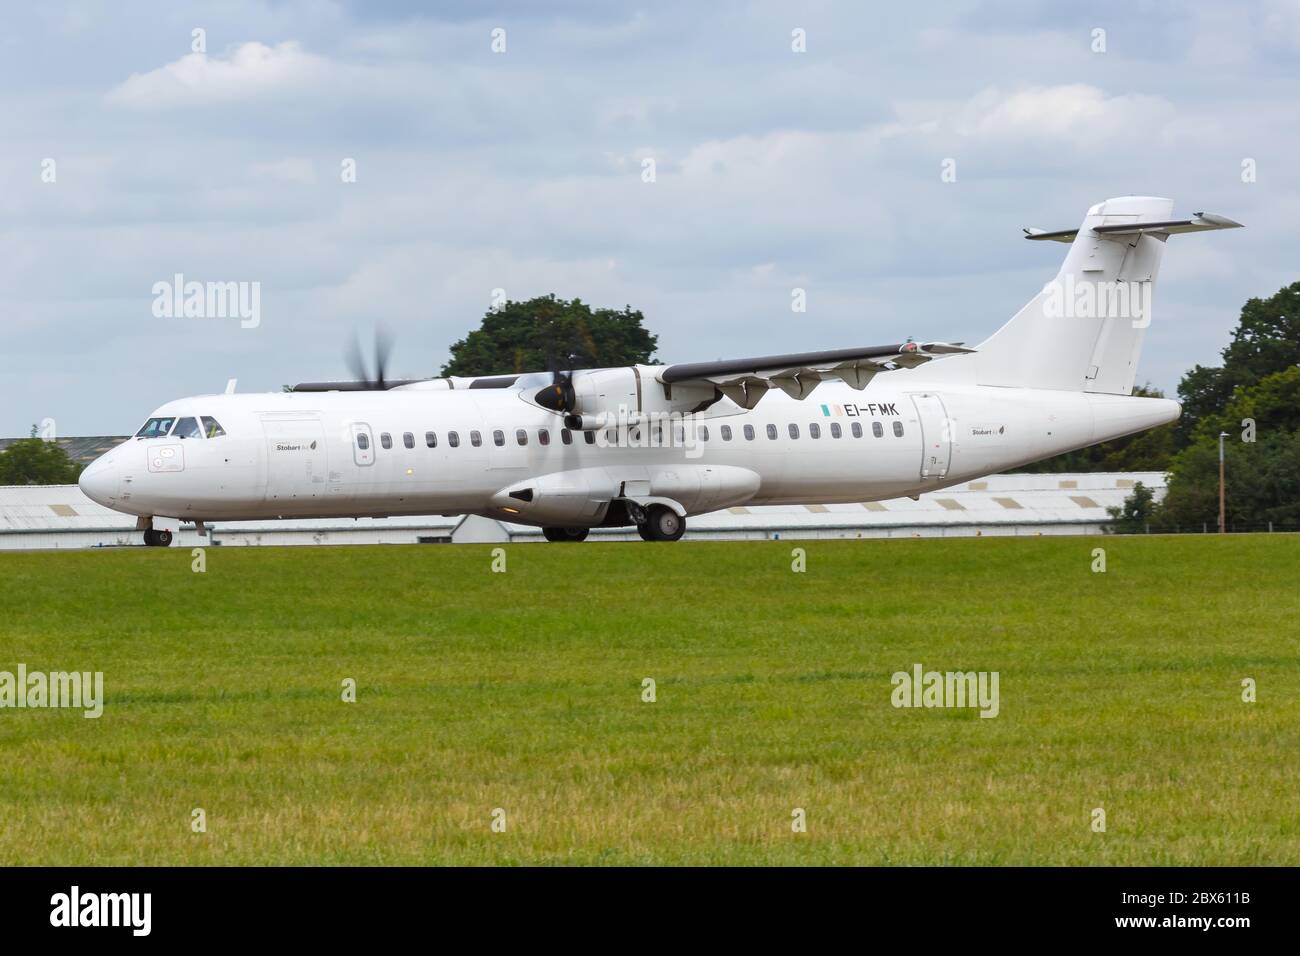 Southend, United Kingdom July 7, 2019: Stobart Air ATR 72-600 airplane at London Southend airport SEN in the United Kingdom. Stock Photo